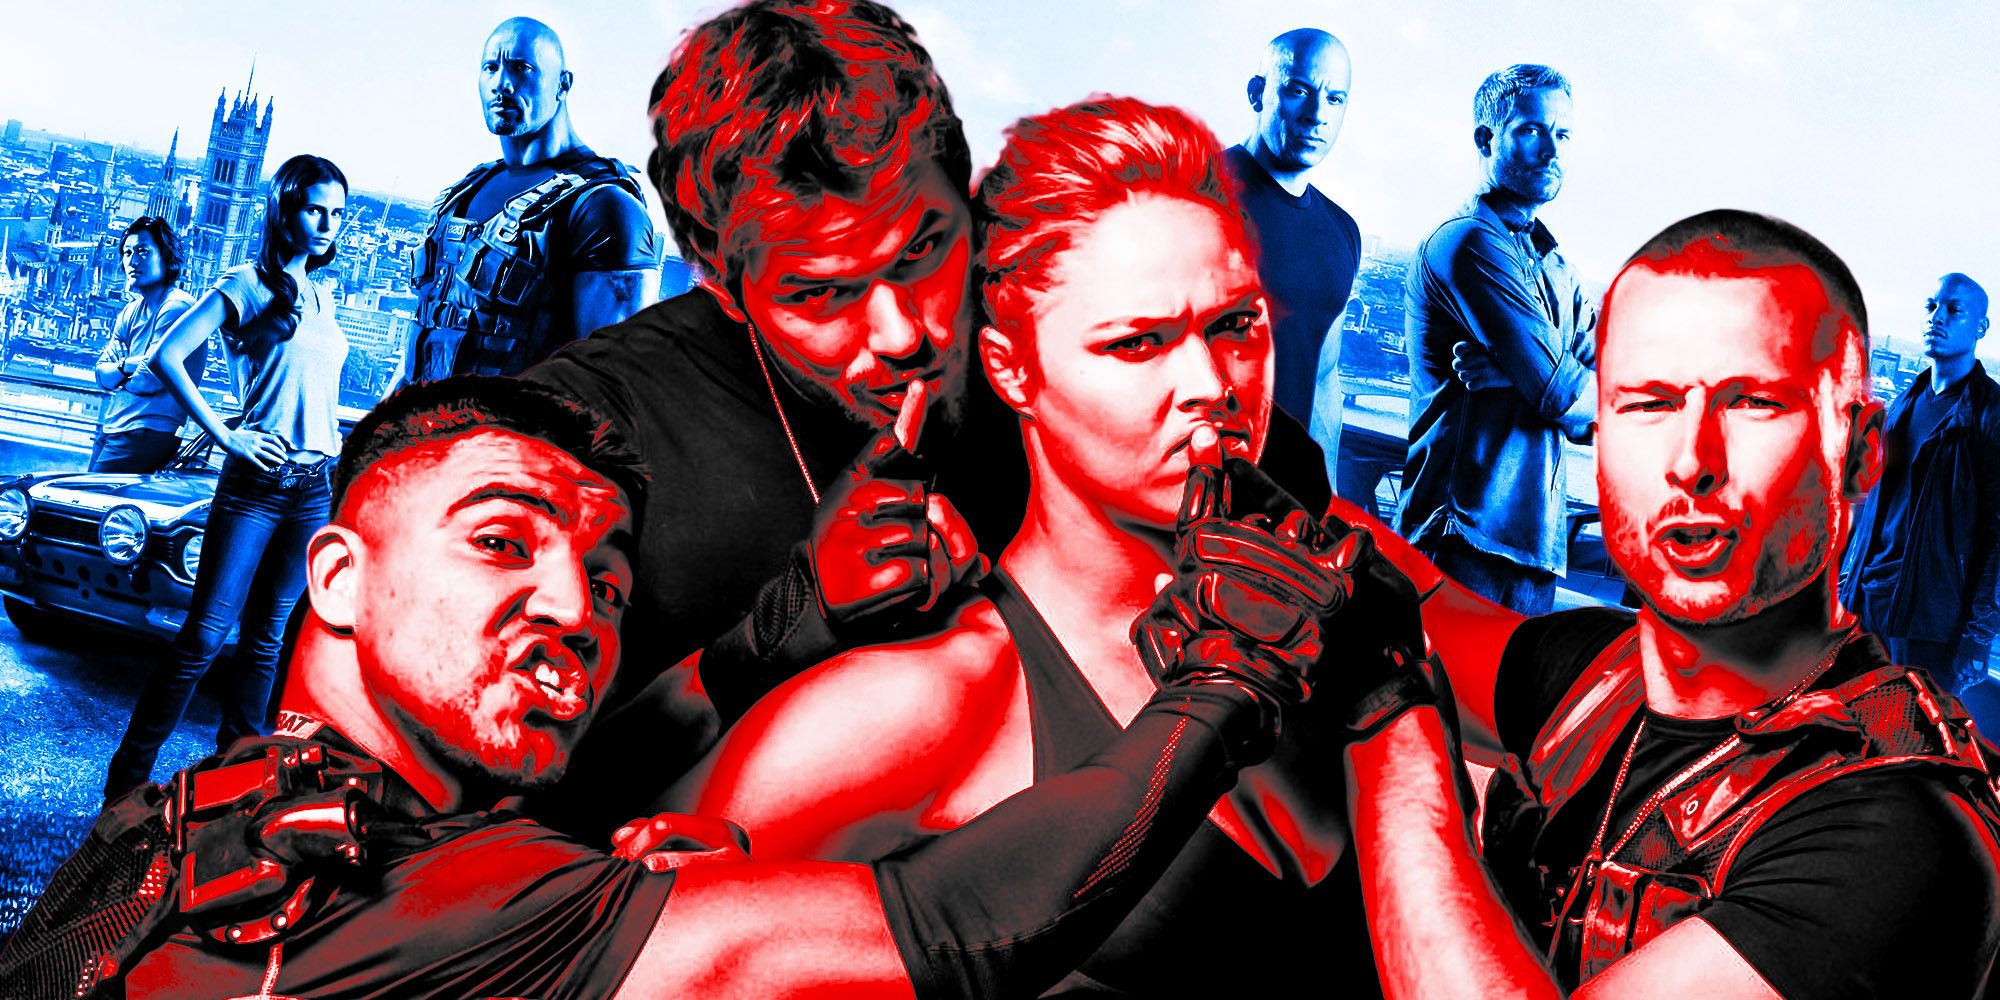 Expendables young cast ronda rousey kellen lutz glen powell fast and furious 6